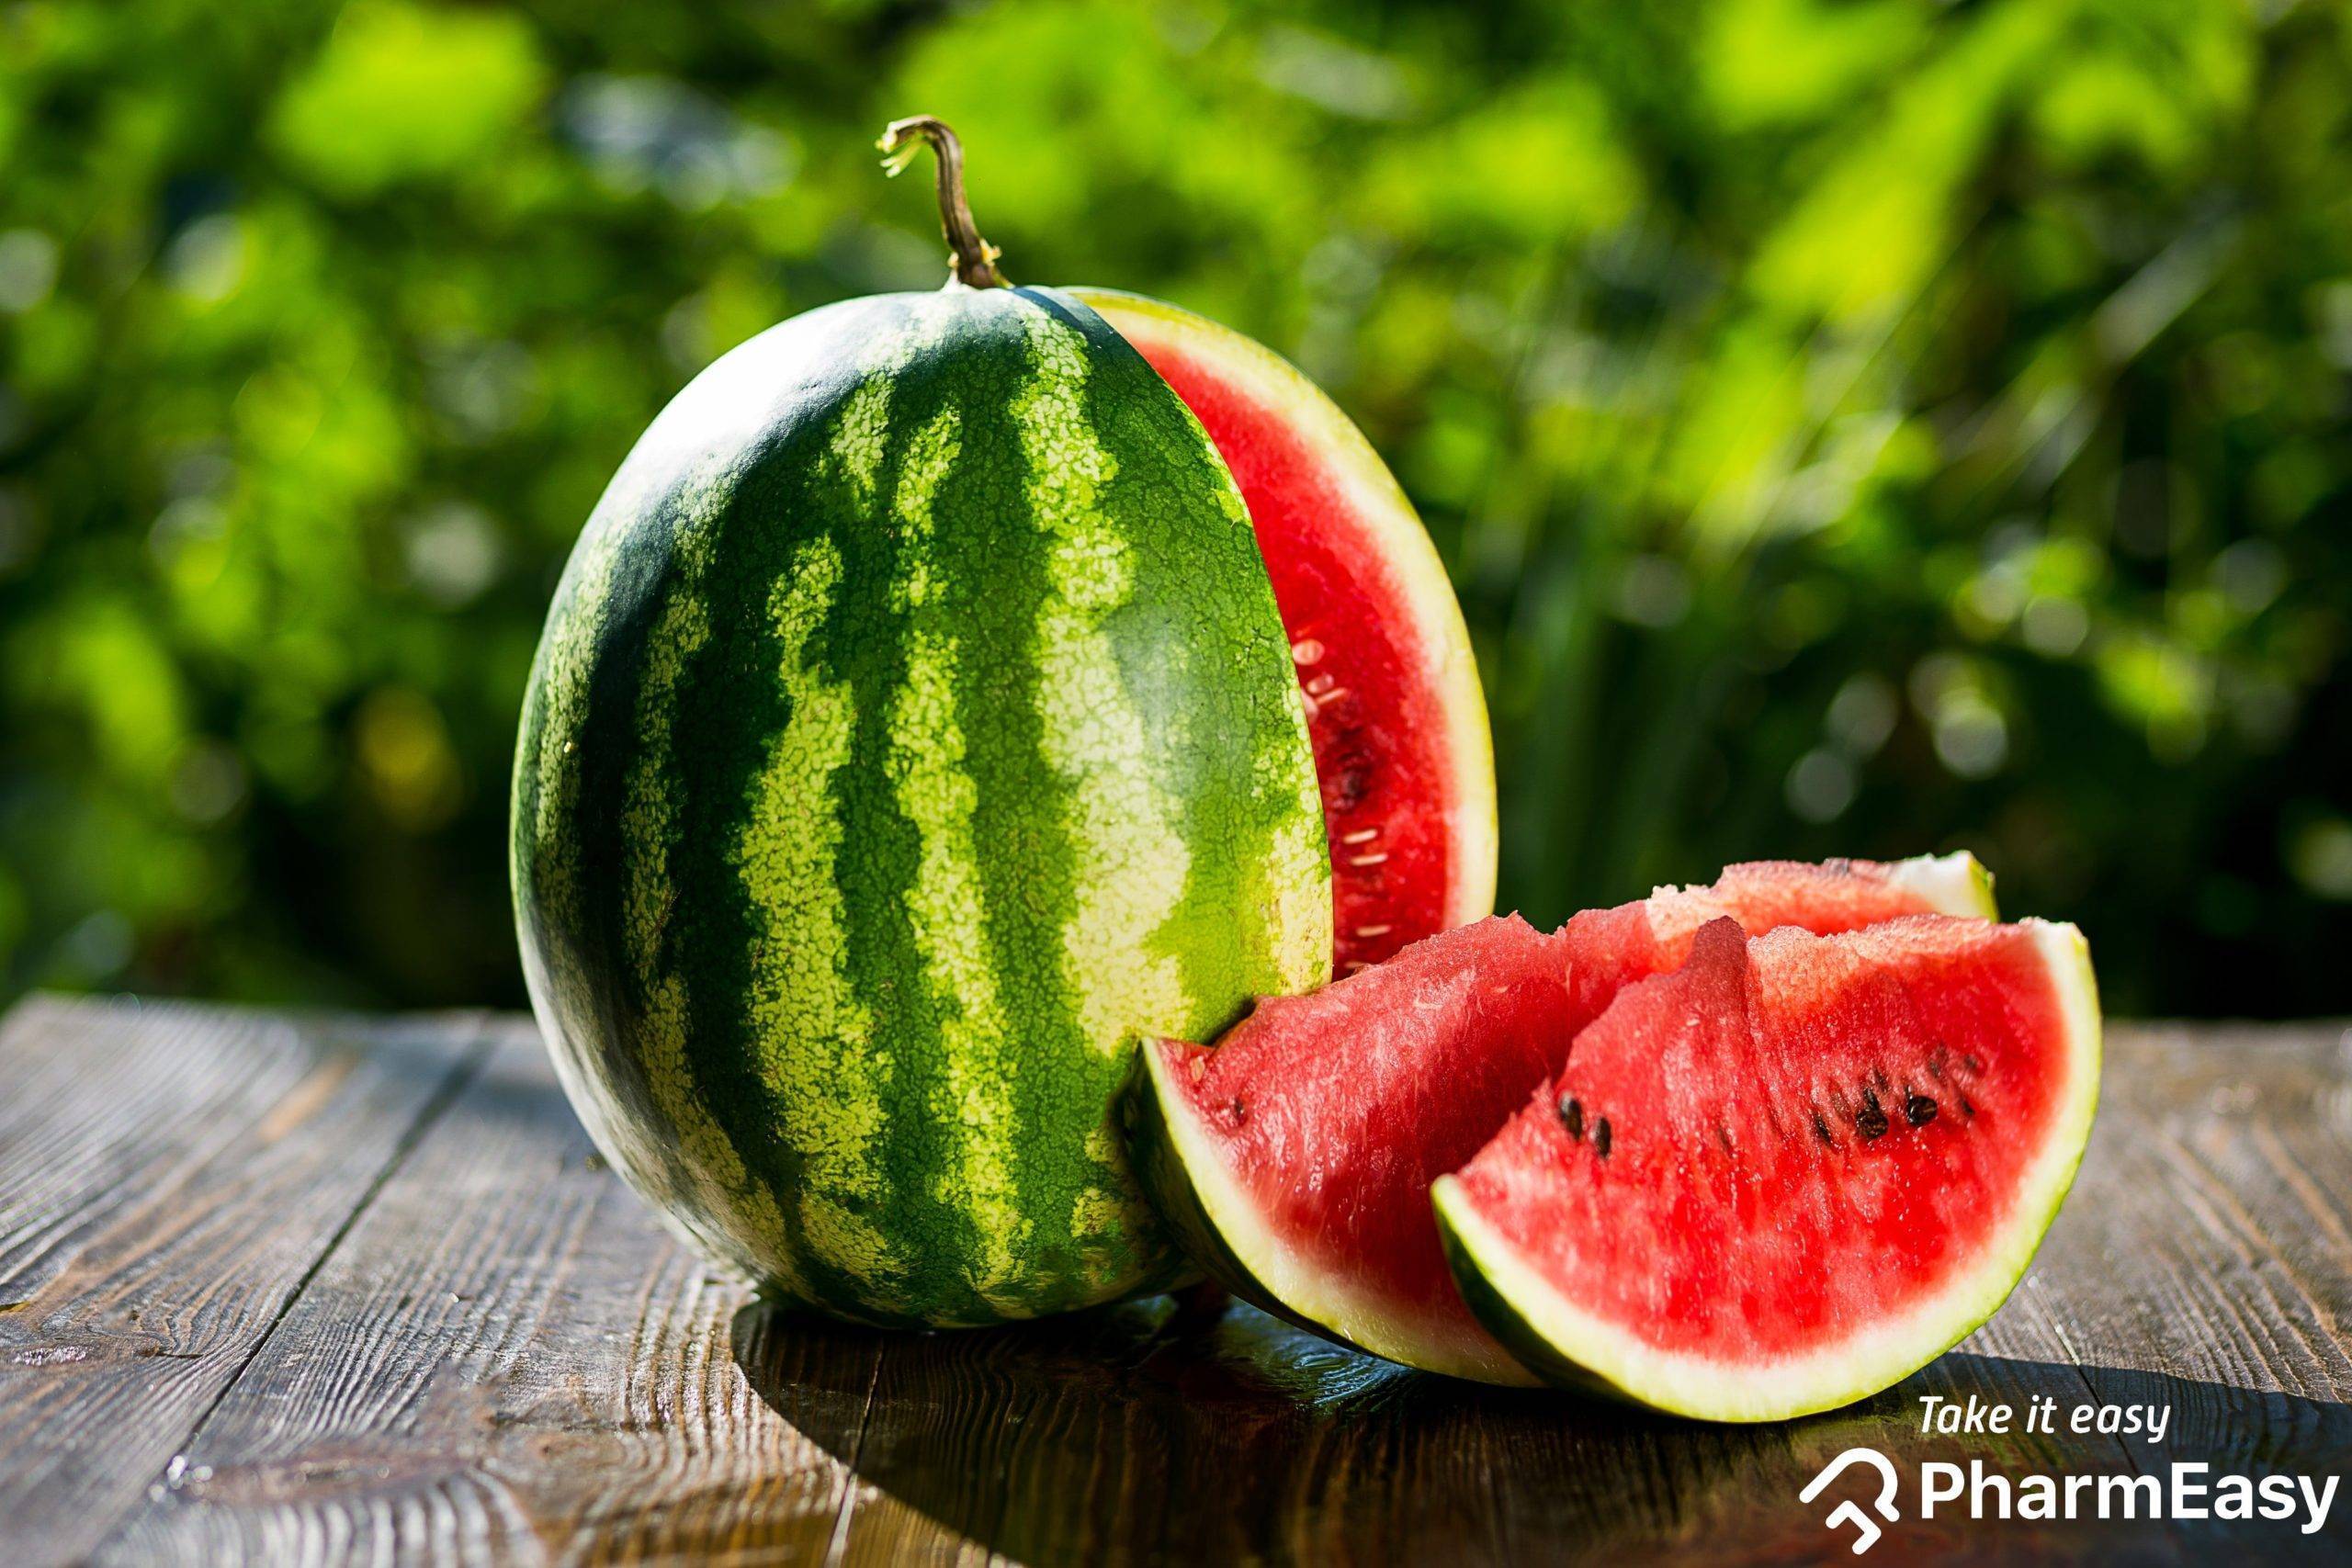 Never throw away your watermelon seeds, this is why.